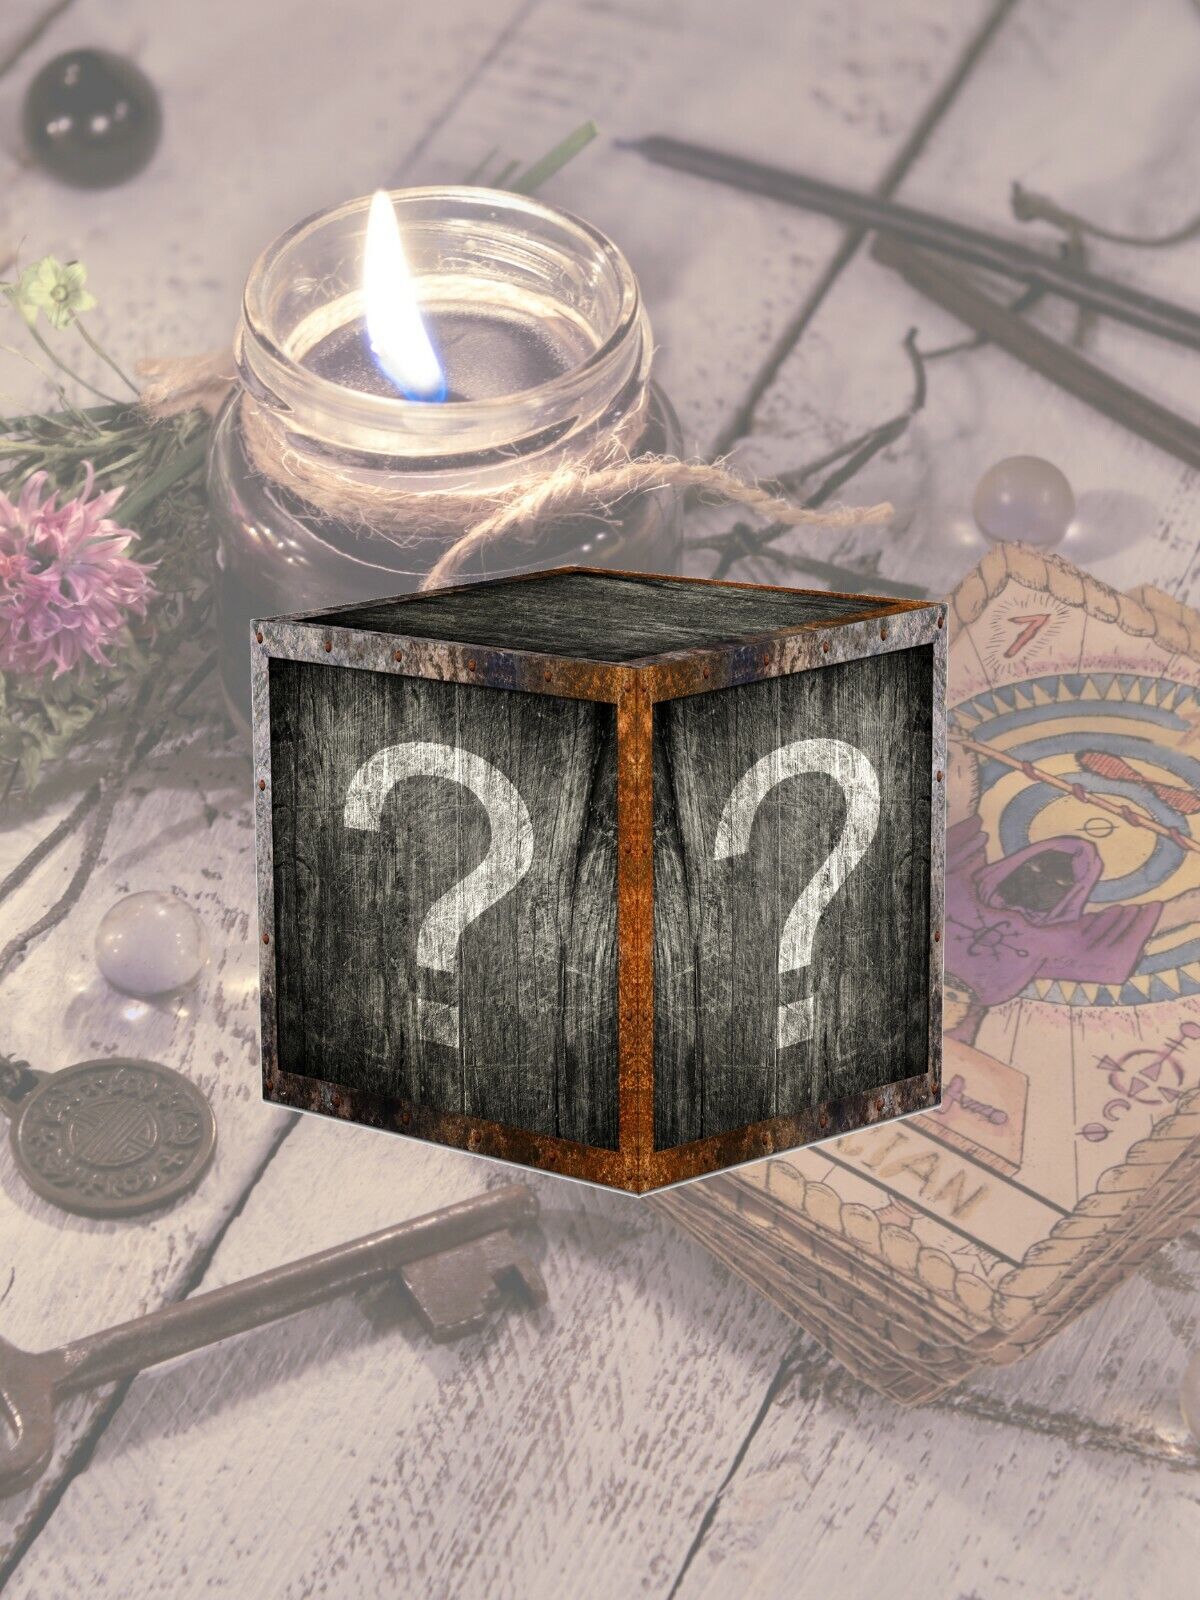 Witchy Surprise Box / Spooky / Spells / Spiritual